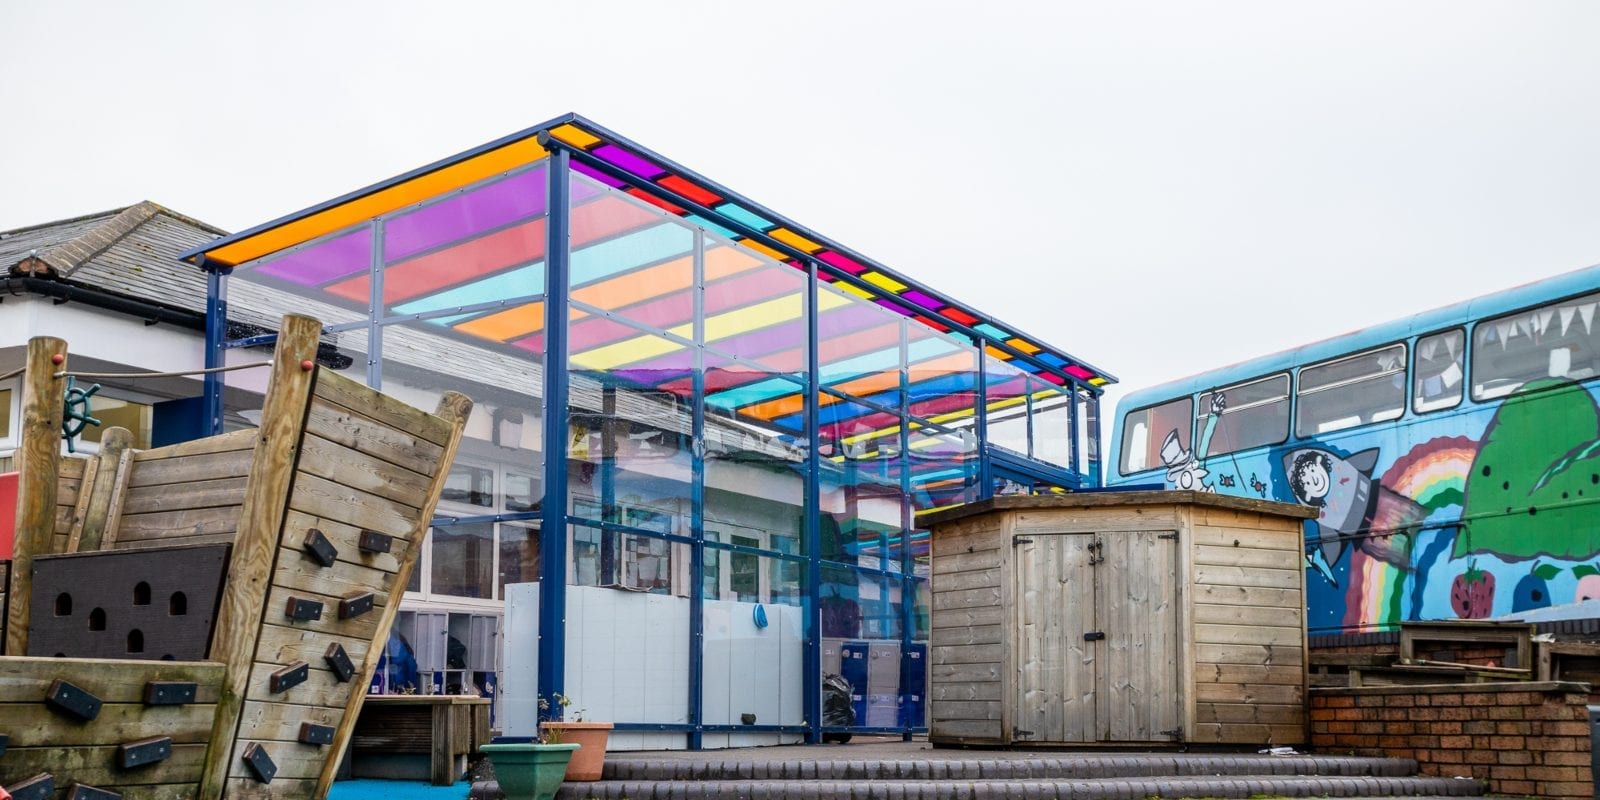 Enclosed shelter we designed for Old Church Primary School